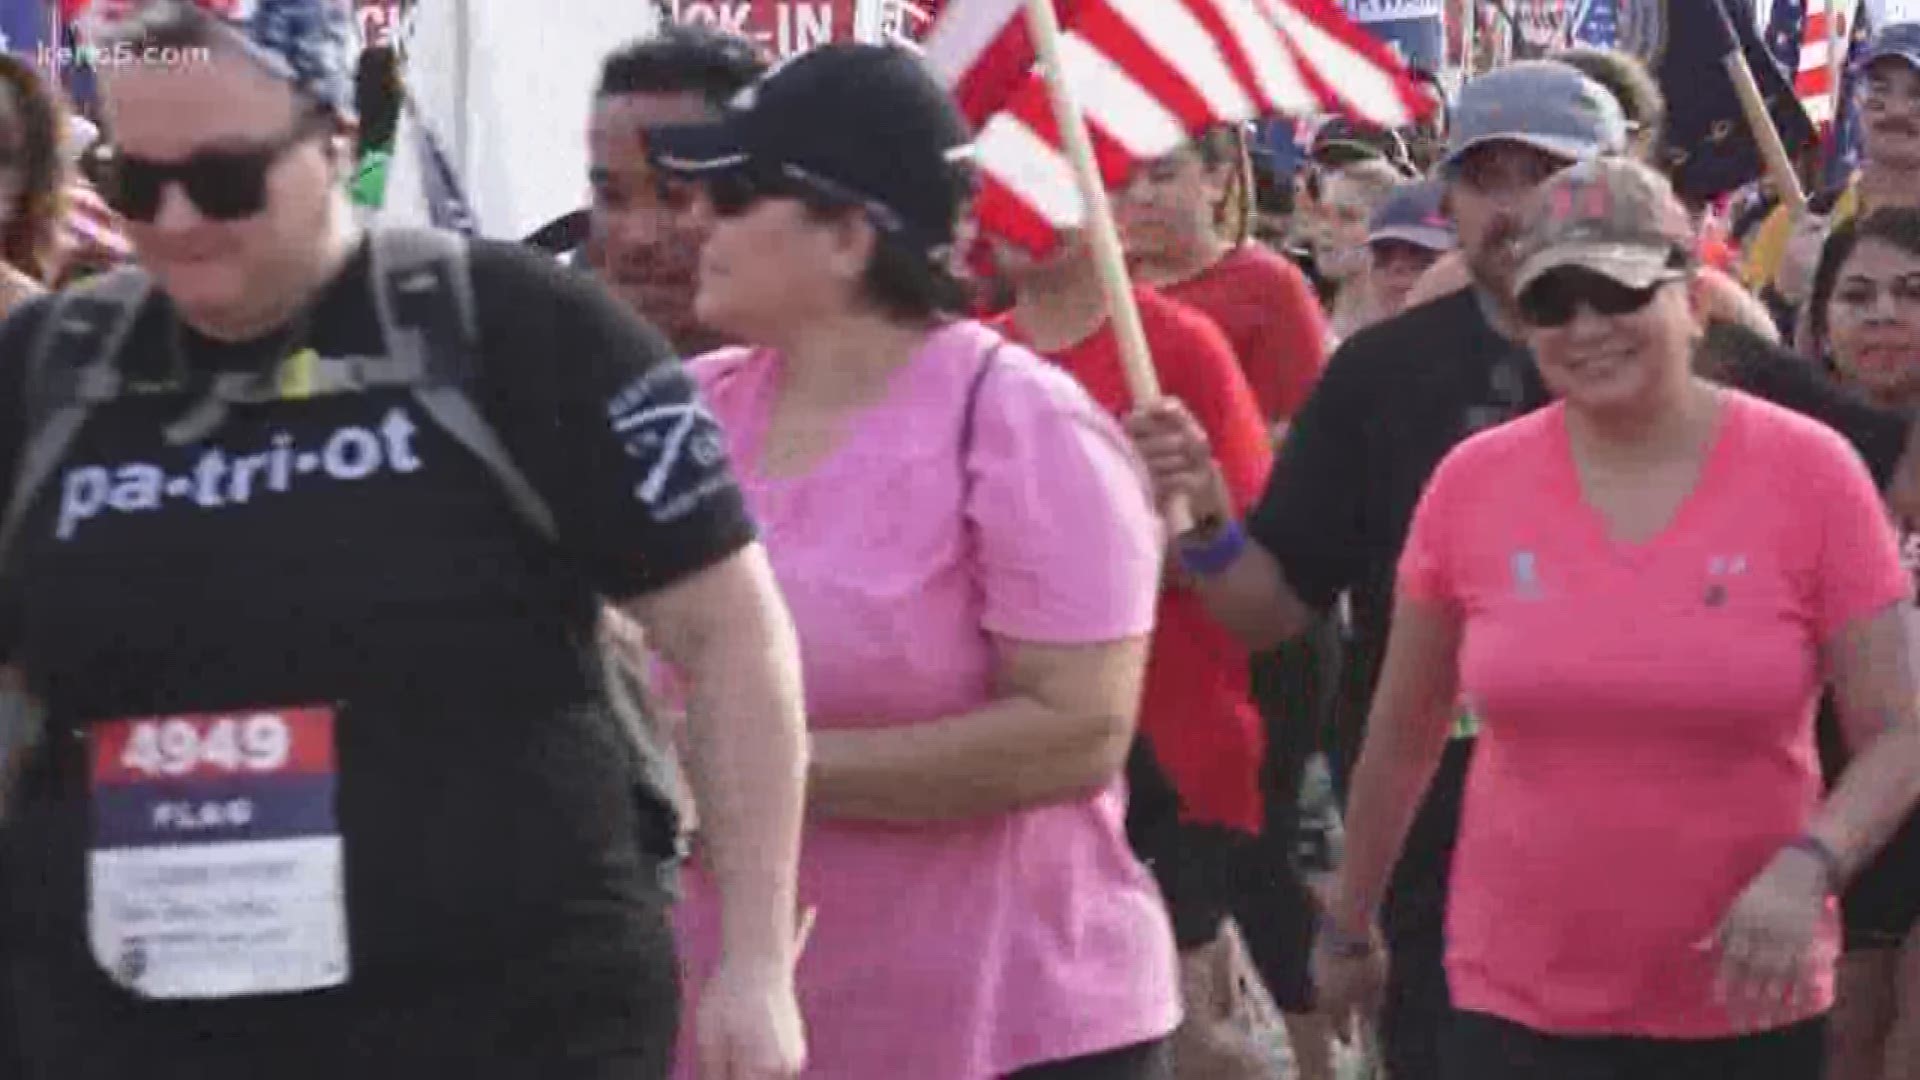 The Wounded Warrior Carry Forward 5K was held, for the first time, in the Military City. And it saw a massive turnout.